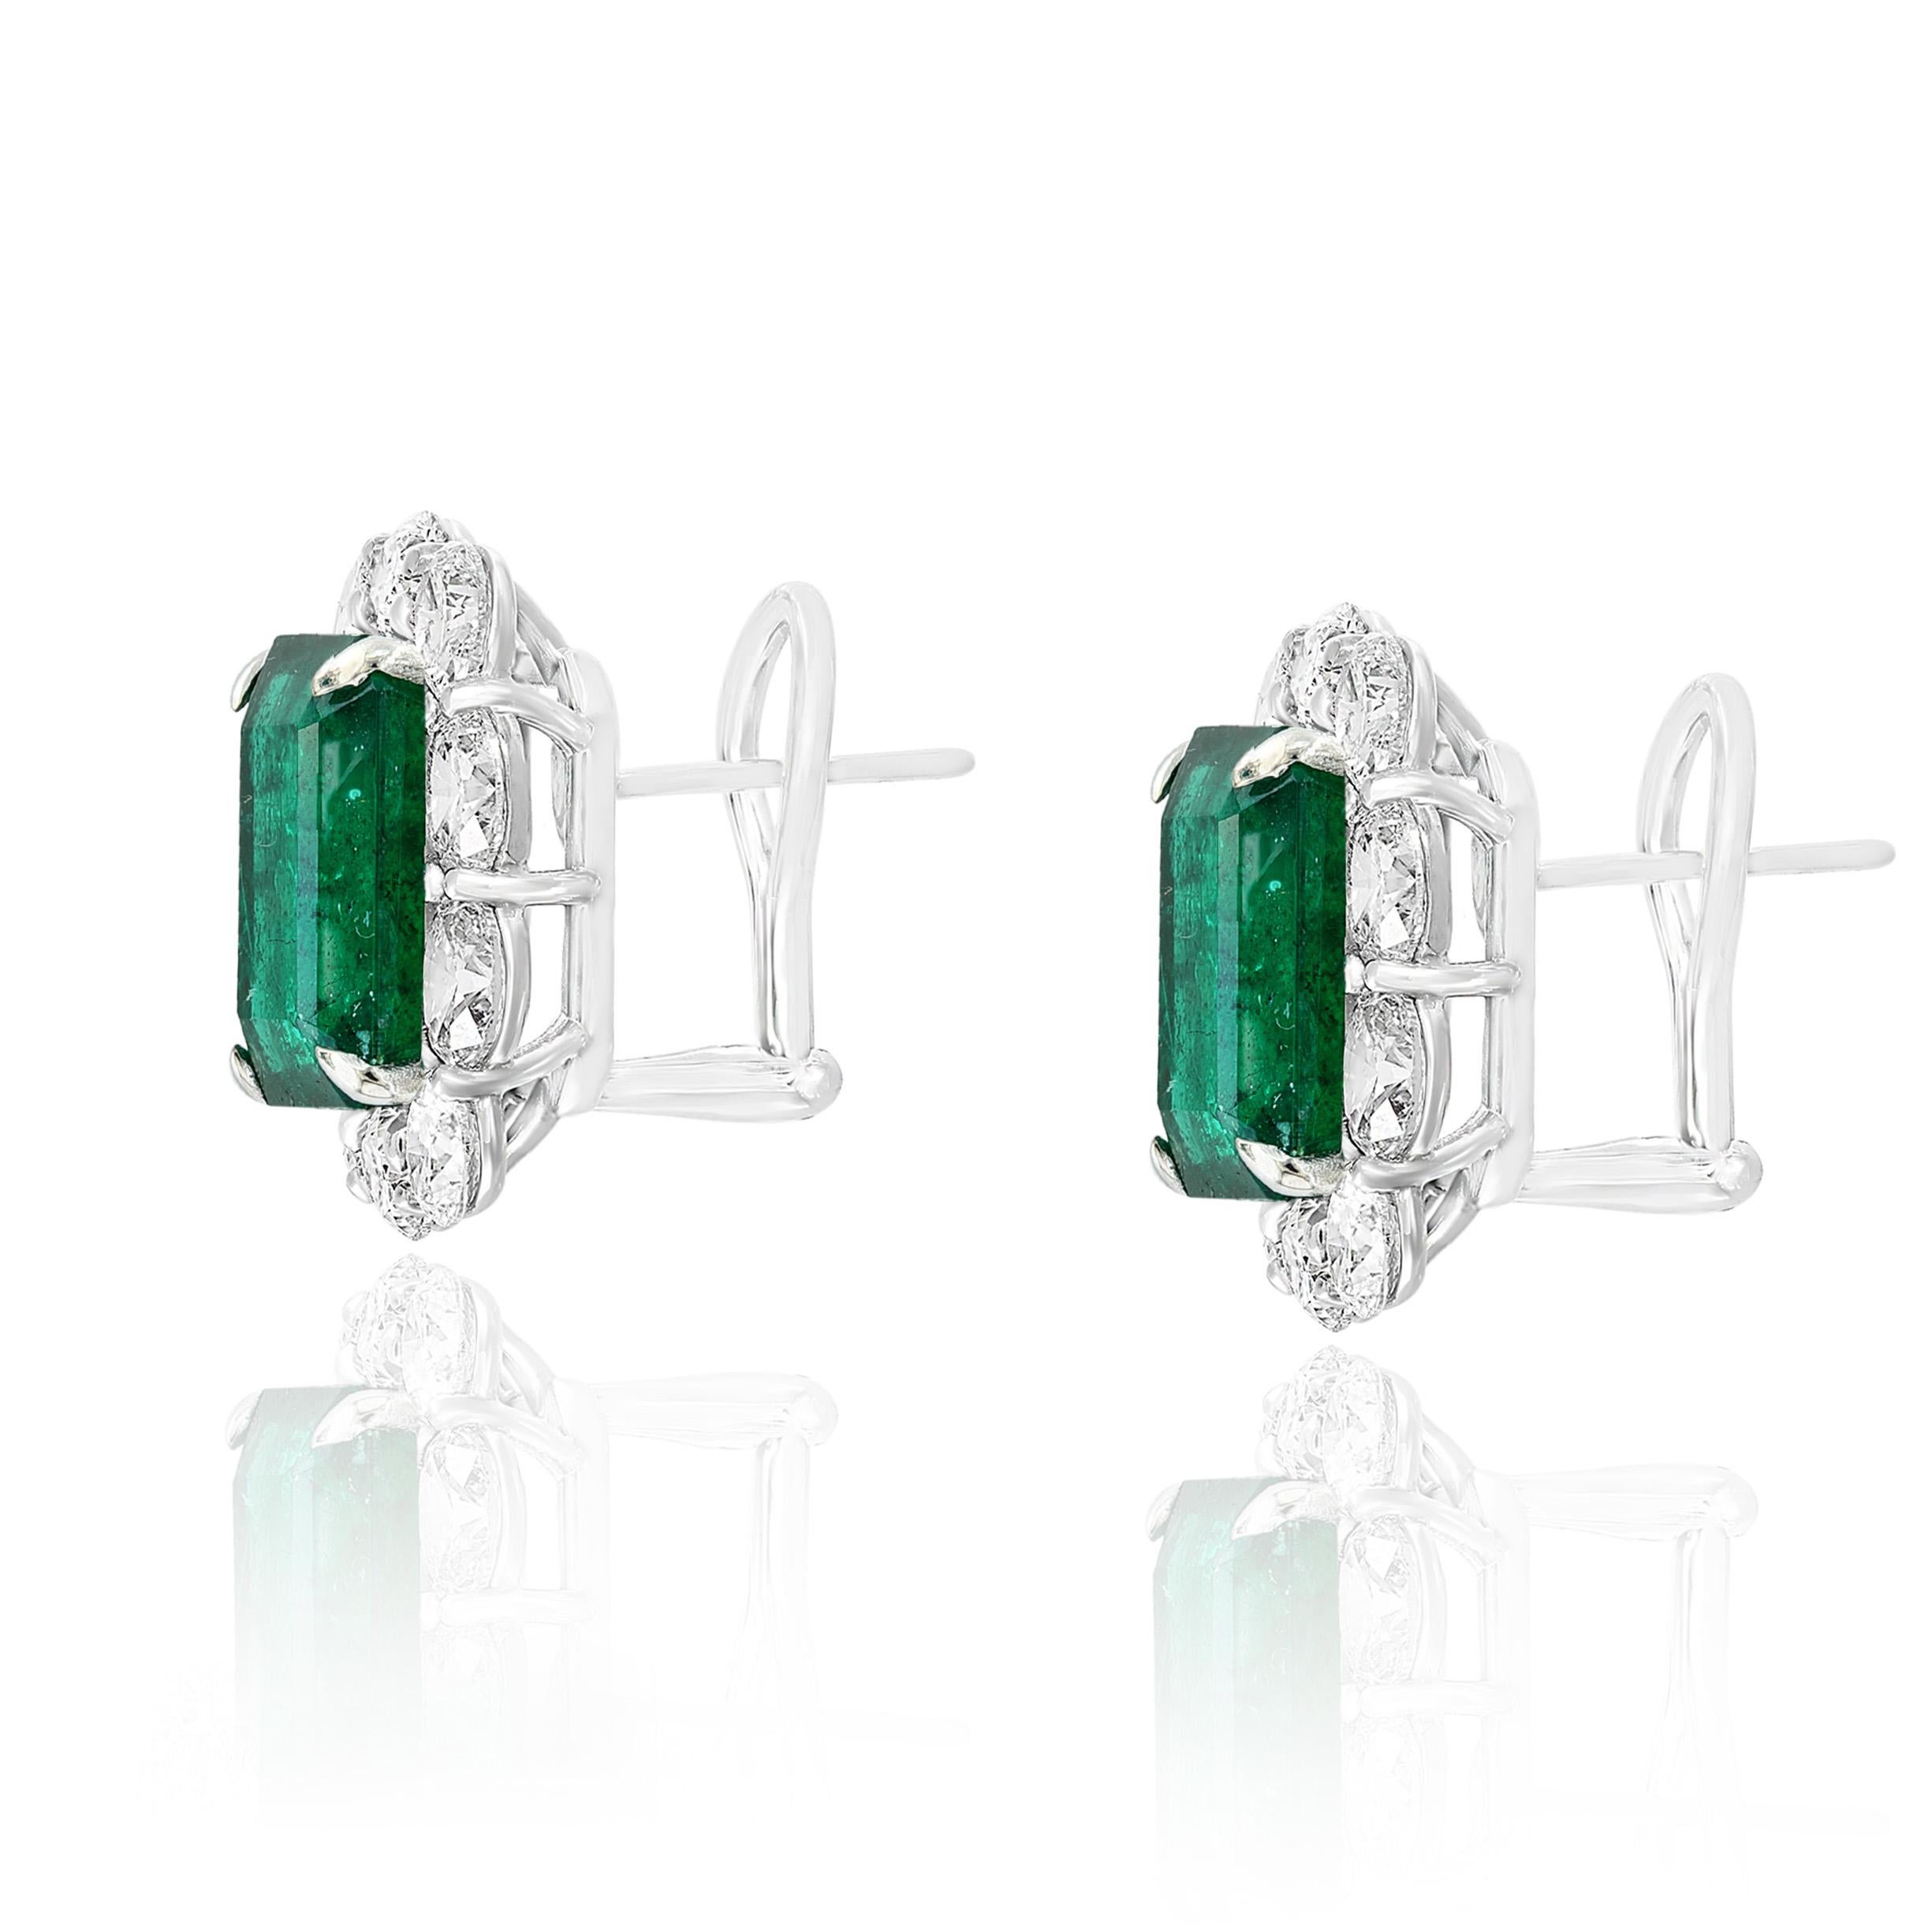 Modern 6.15 Carat Emerald Cut Emerald and Diamond Halo Earring in 18K White Gold For Sale